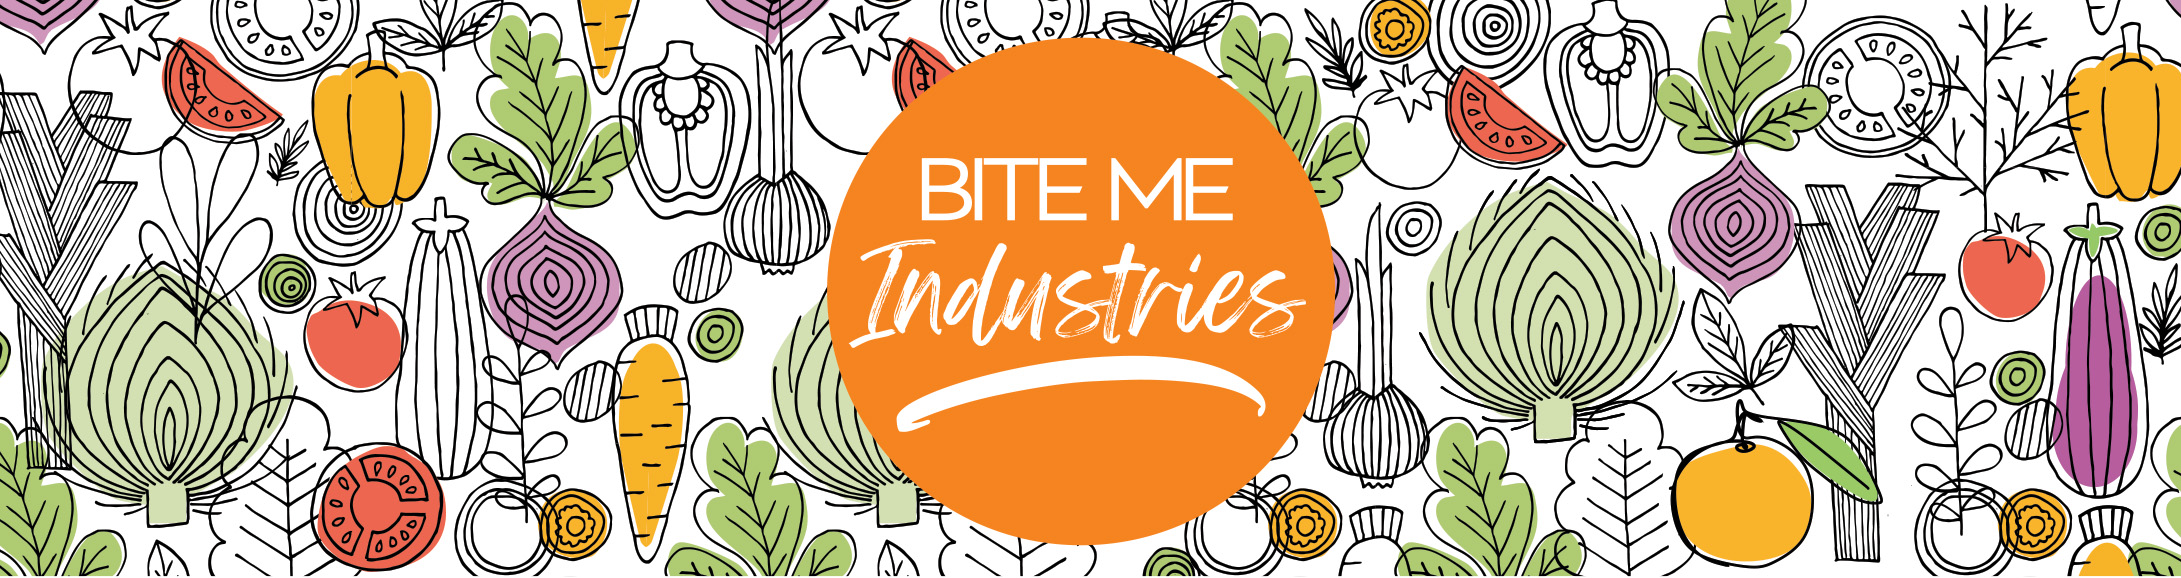 Bite Me Industries Logo with produce background